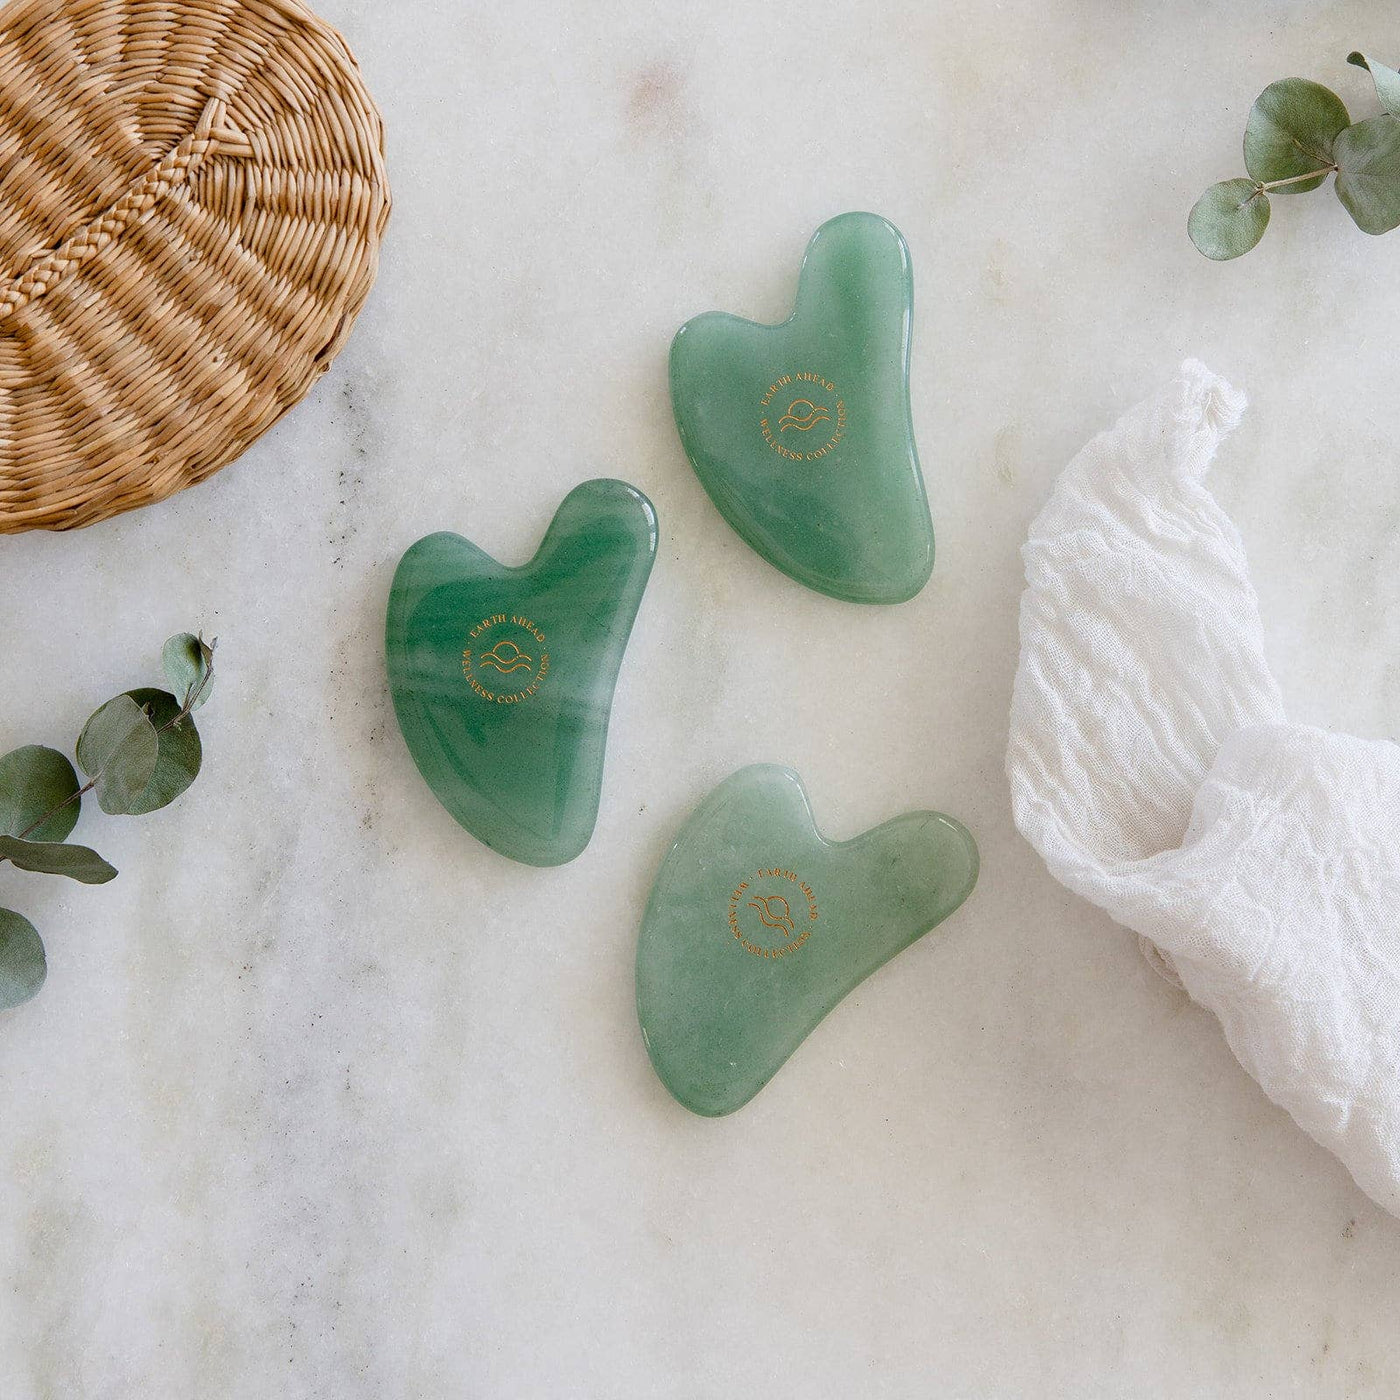 Earth Ahead - Green Aventurine Gua Sha Tool in Wellness Collection Pouch